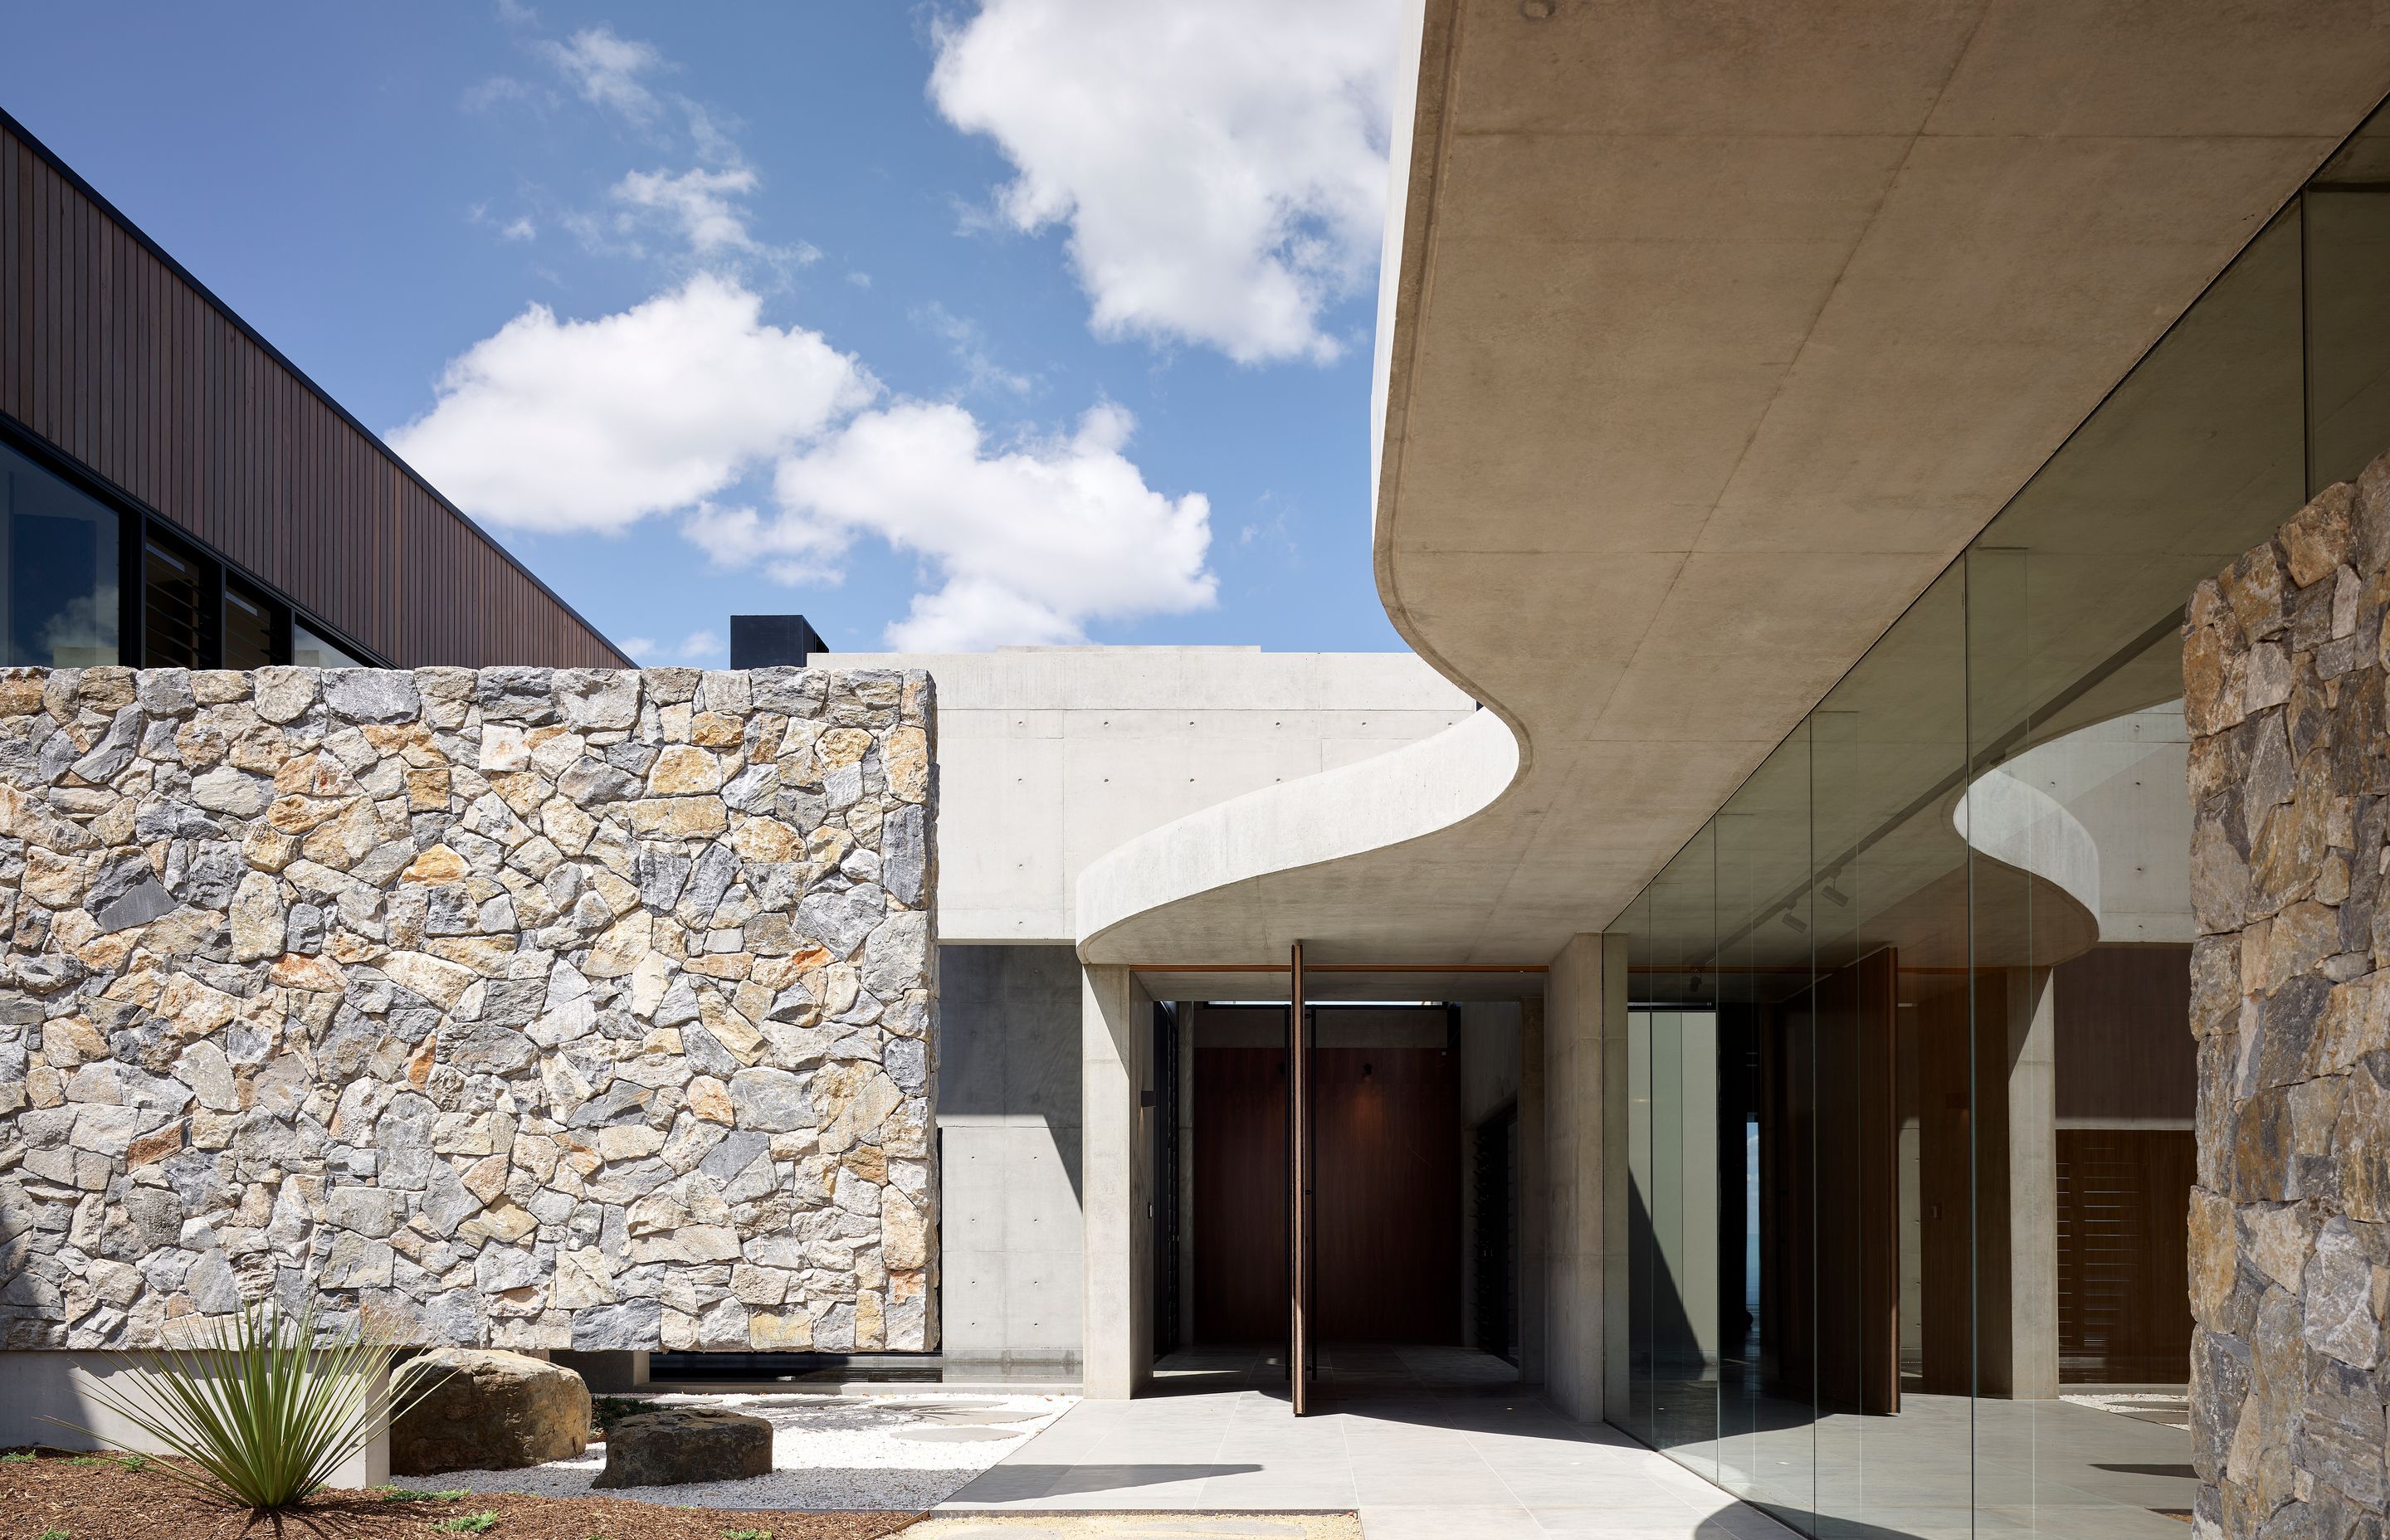 Wamberal Freeform stone walling is ideal for residential and commercial applicatons. Here, it's been teamed with Andorra limestone pavers, which exhibit light grey hues. Photography by Scott Burrows.